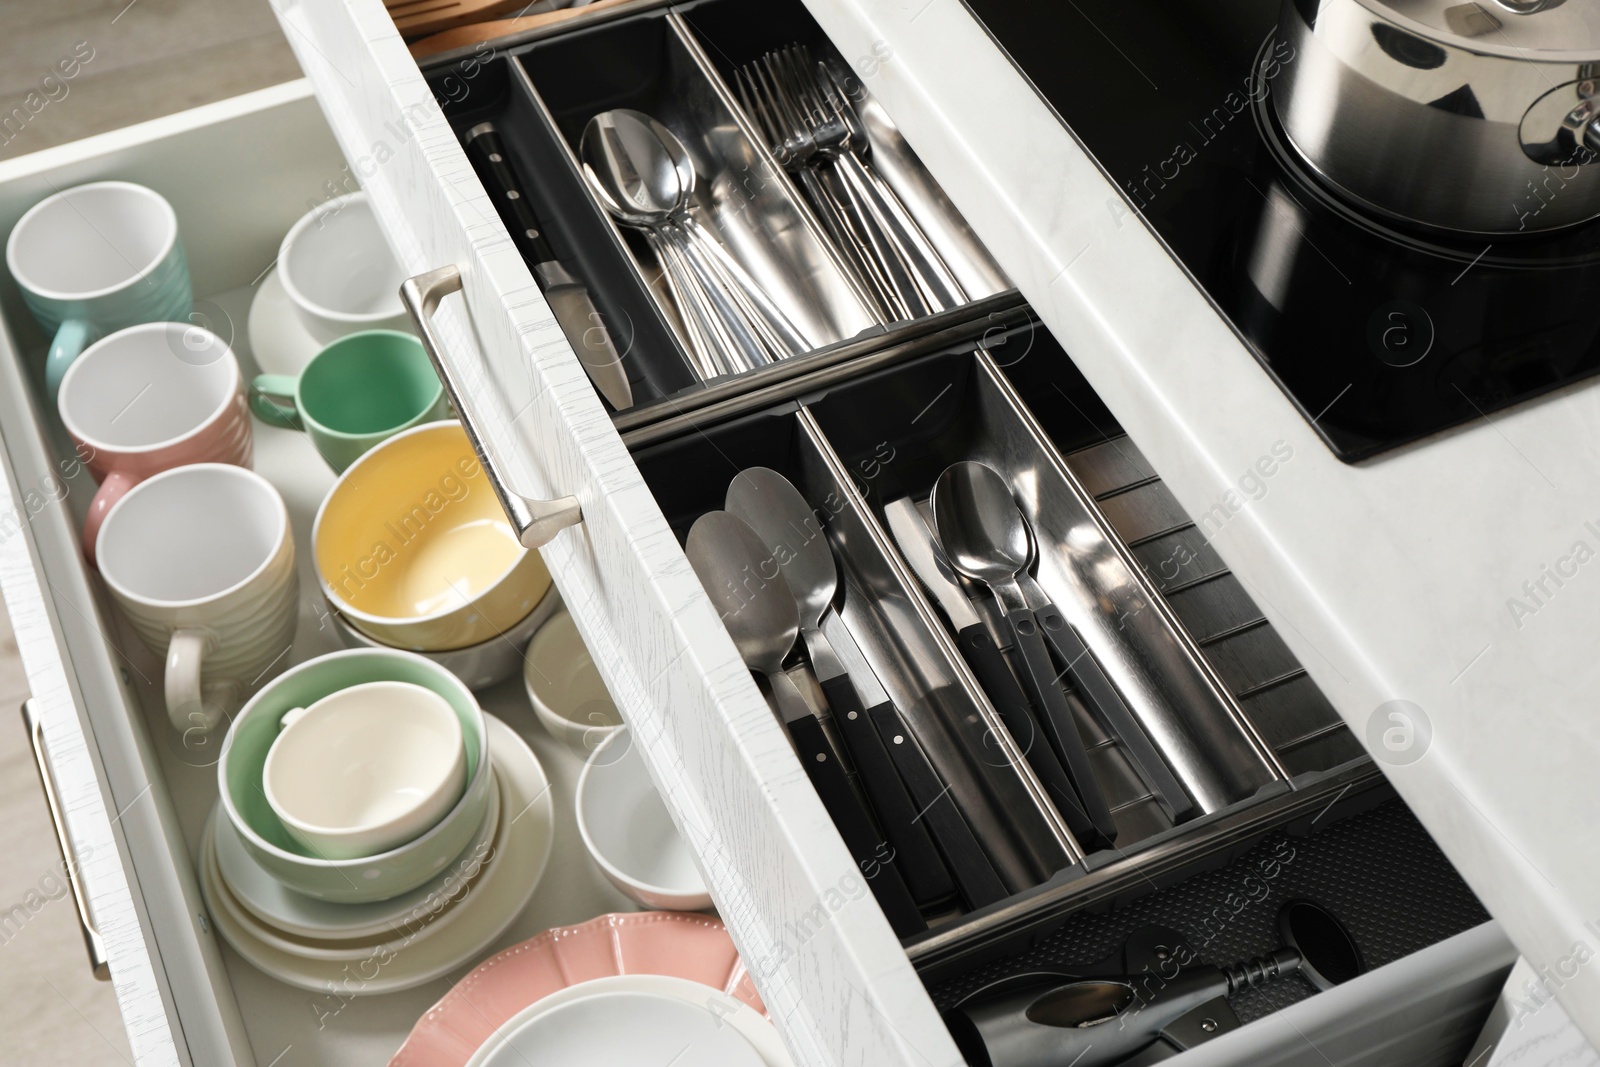 Photo of Ceramic dishware and cutlery in drawers indoors